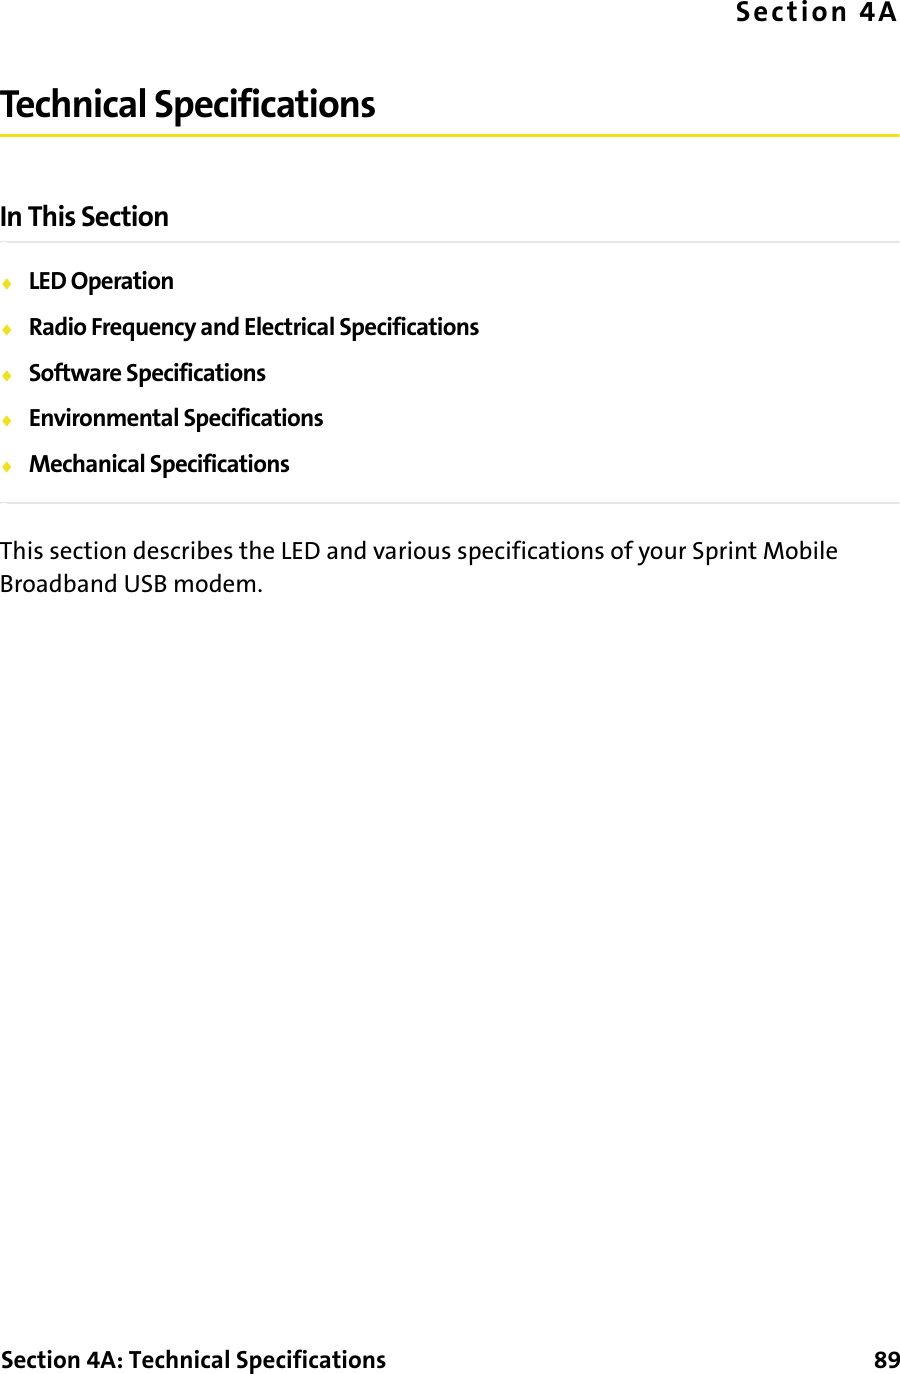 Section 4A: Technical Specifications      89Section 4ATechnical SpecificationsIn This Section⽧LED Operation⽧Radio Frequency and Electrical Specifications⽧Software Specifications⽧Environmental Specifications⽧Mechanical SpecificationsThis section describes the LED and various specifications of your Sprint Mobile Broadband USB modem.